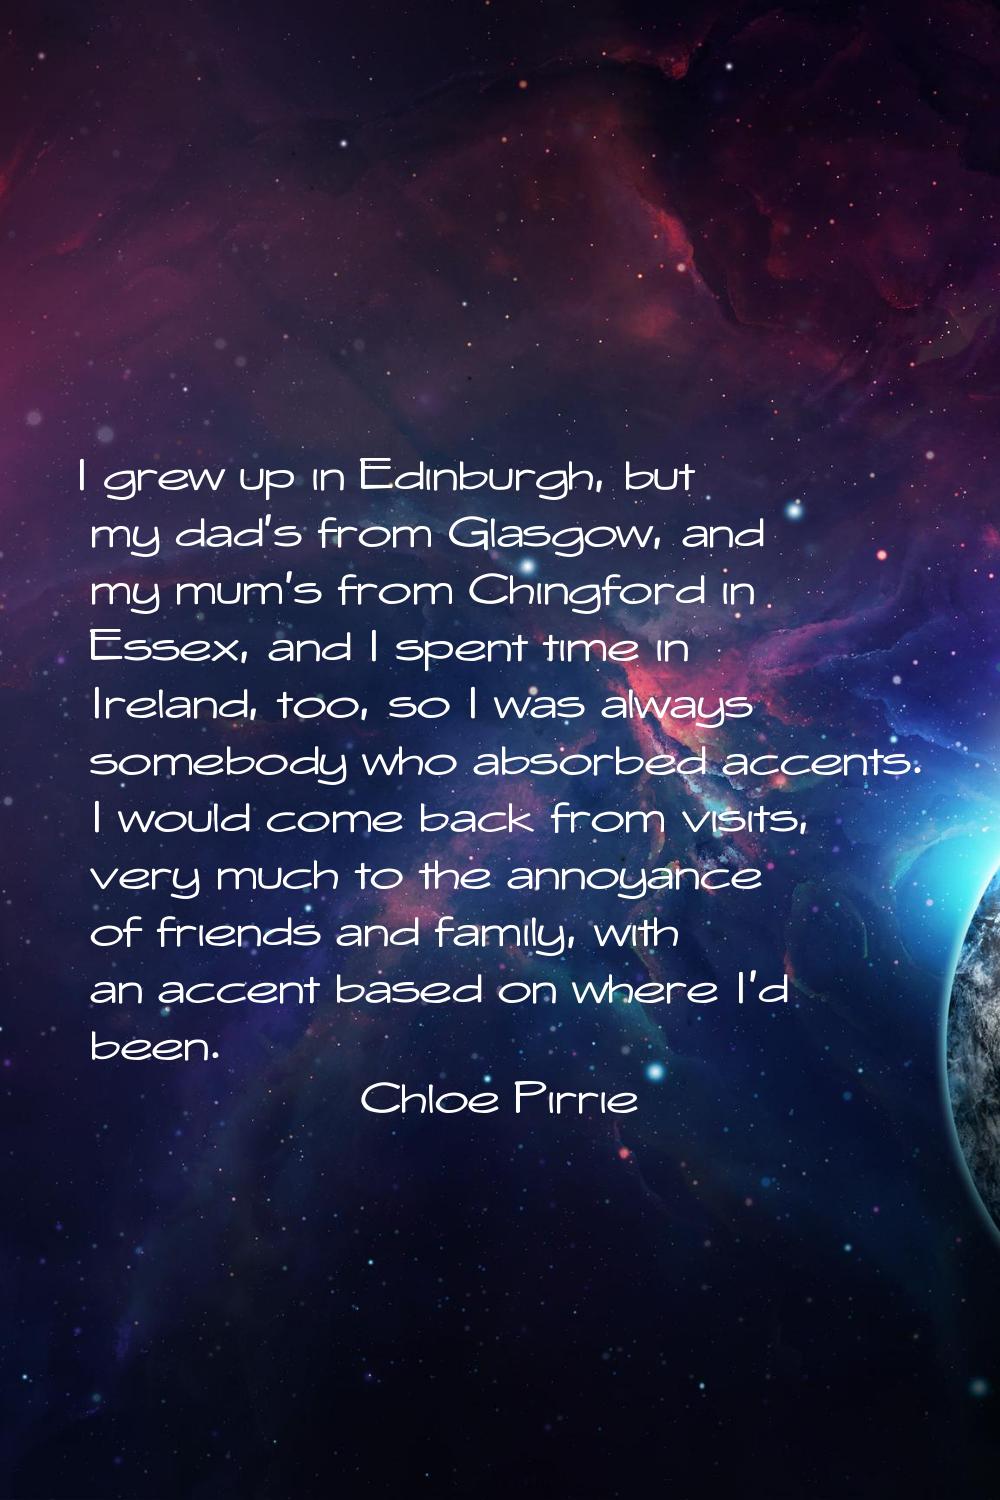 I grew up in Edinburgh, but my dad's from Glasgow, and my mum's from Chingford in Essex, and I spen